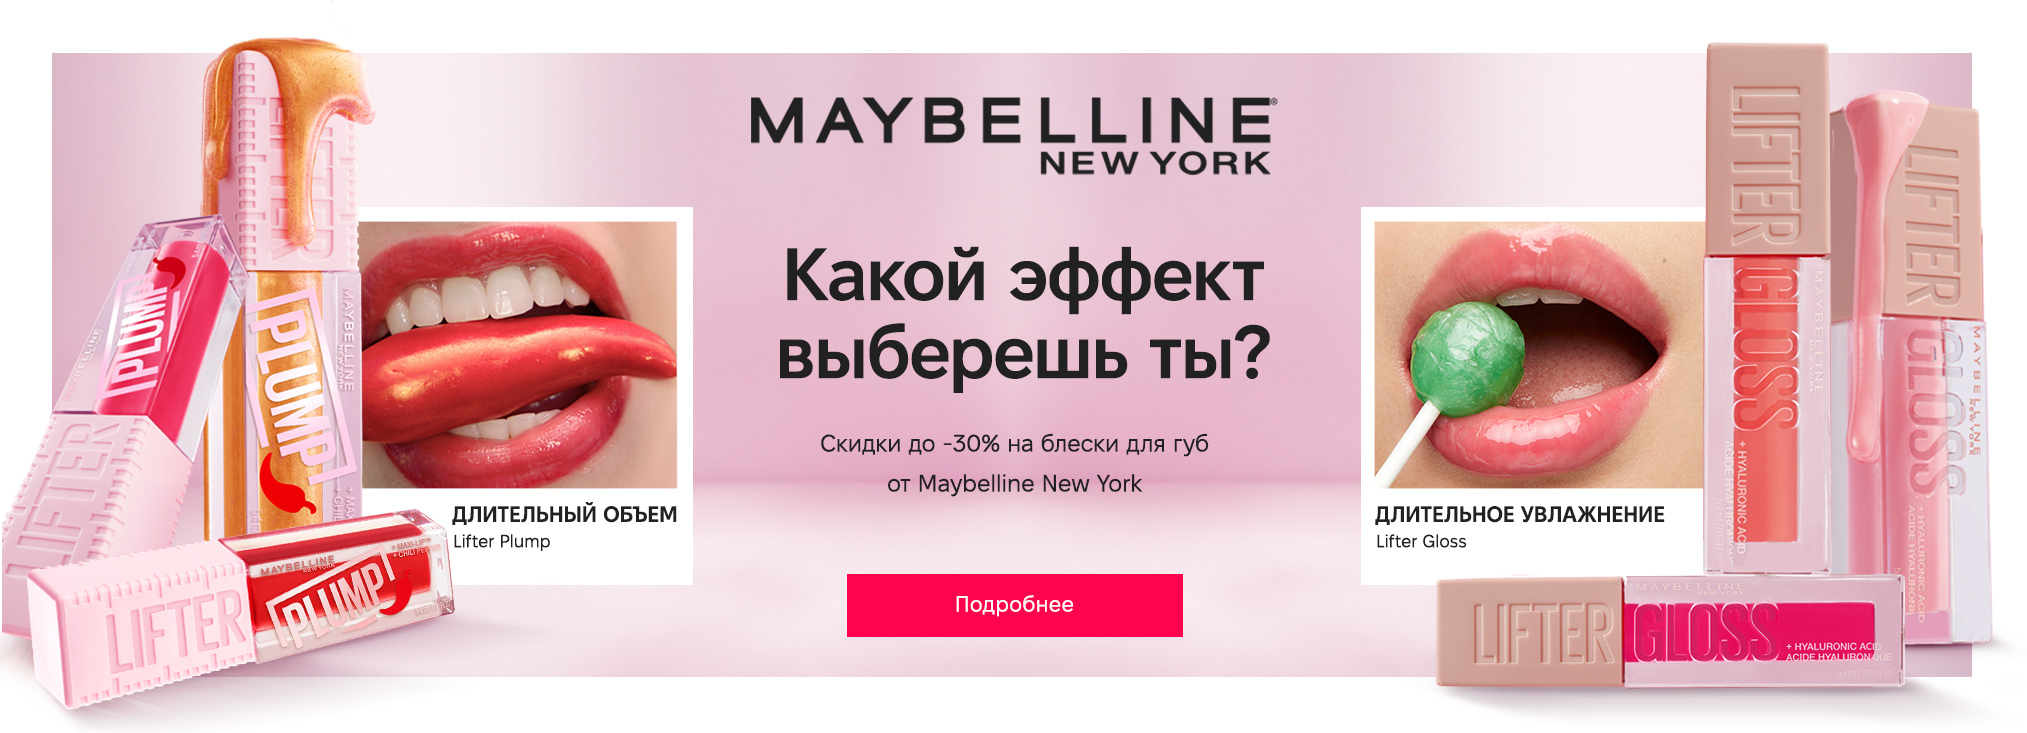 Maybelline New York_actions